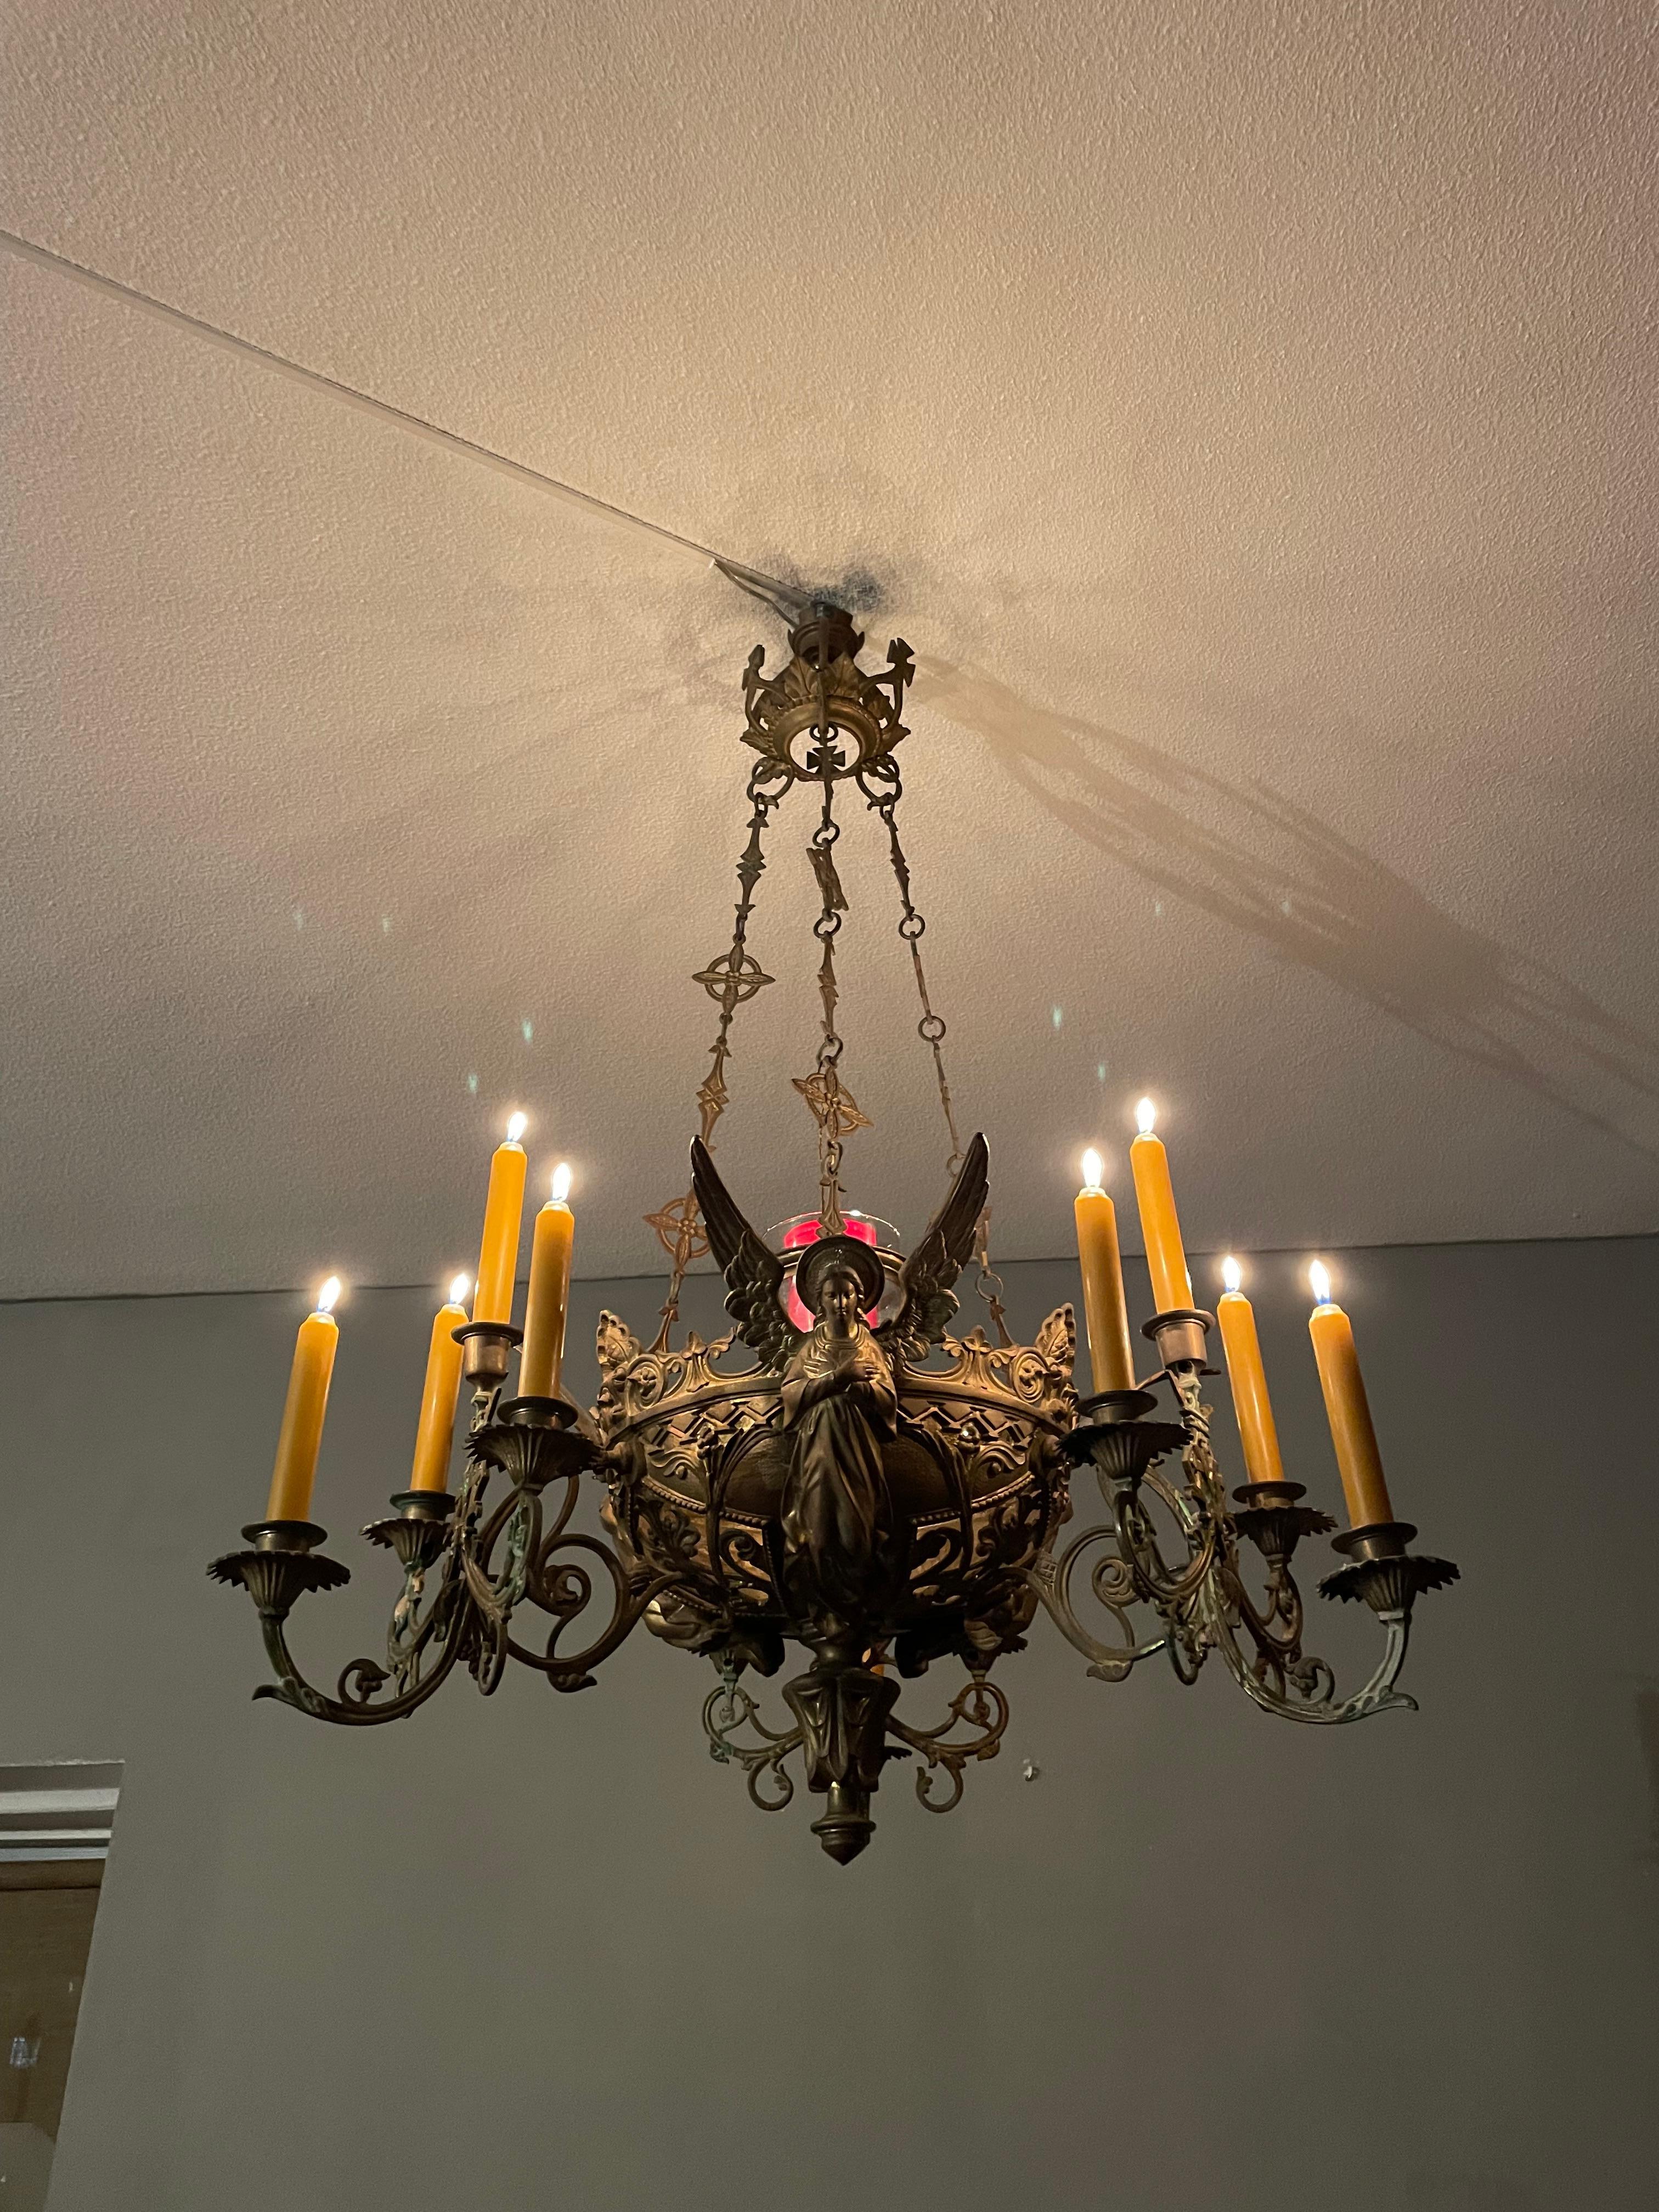 Bronze Gothic Revival Candle Chandelier w. Virgin Mary & Marian Cross Sculptures For Sale 5